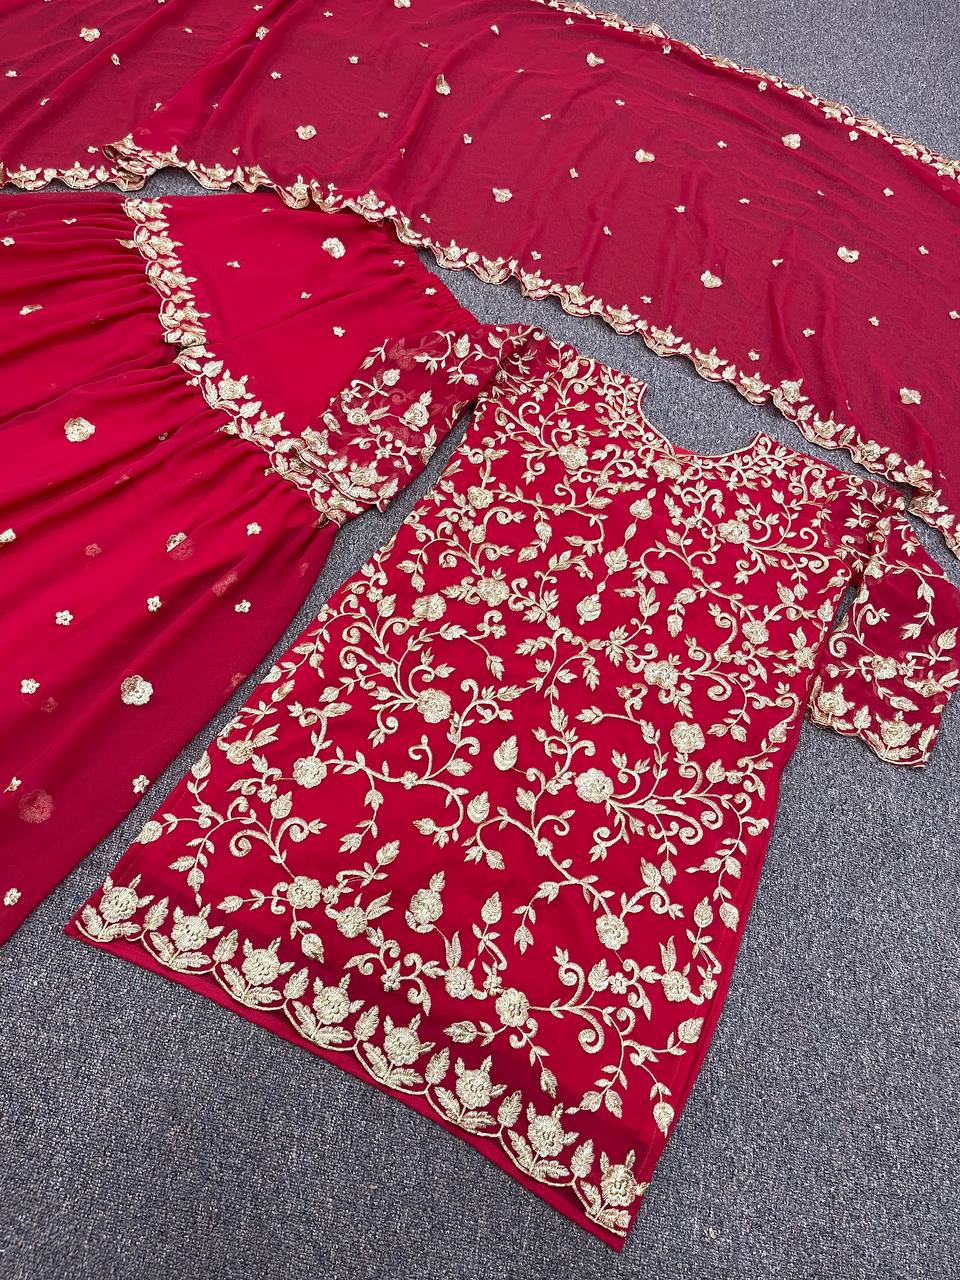 Awesome Red Color Full Embroidery Work Sharara Suit